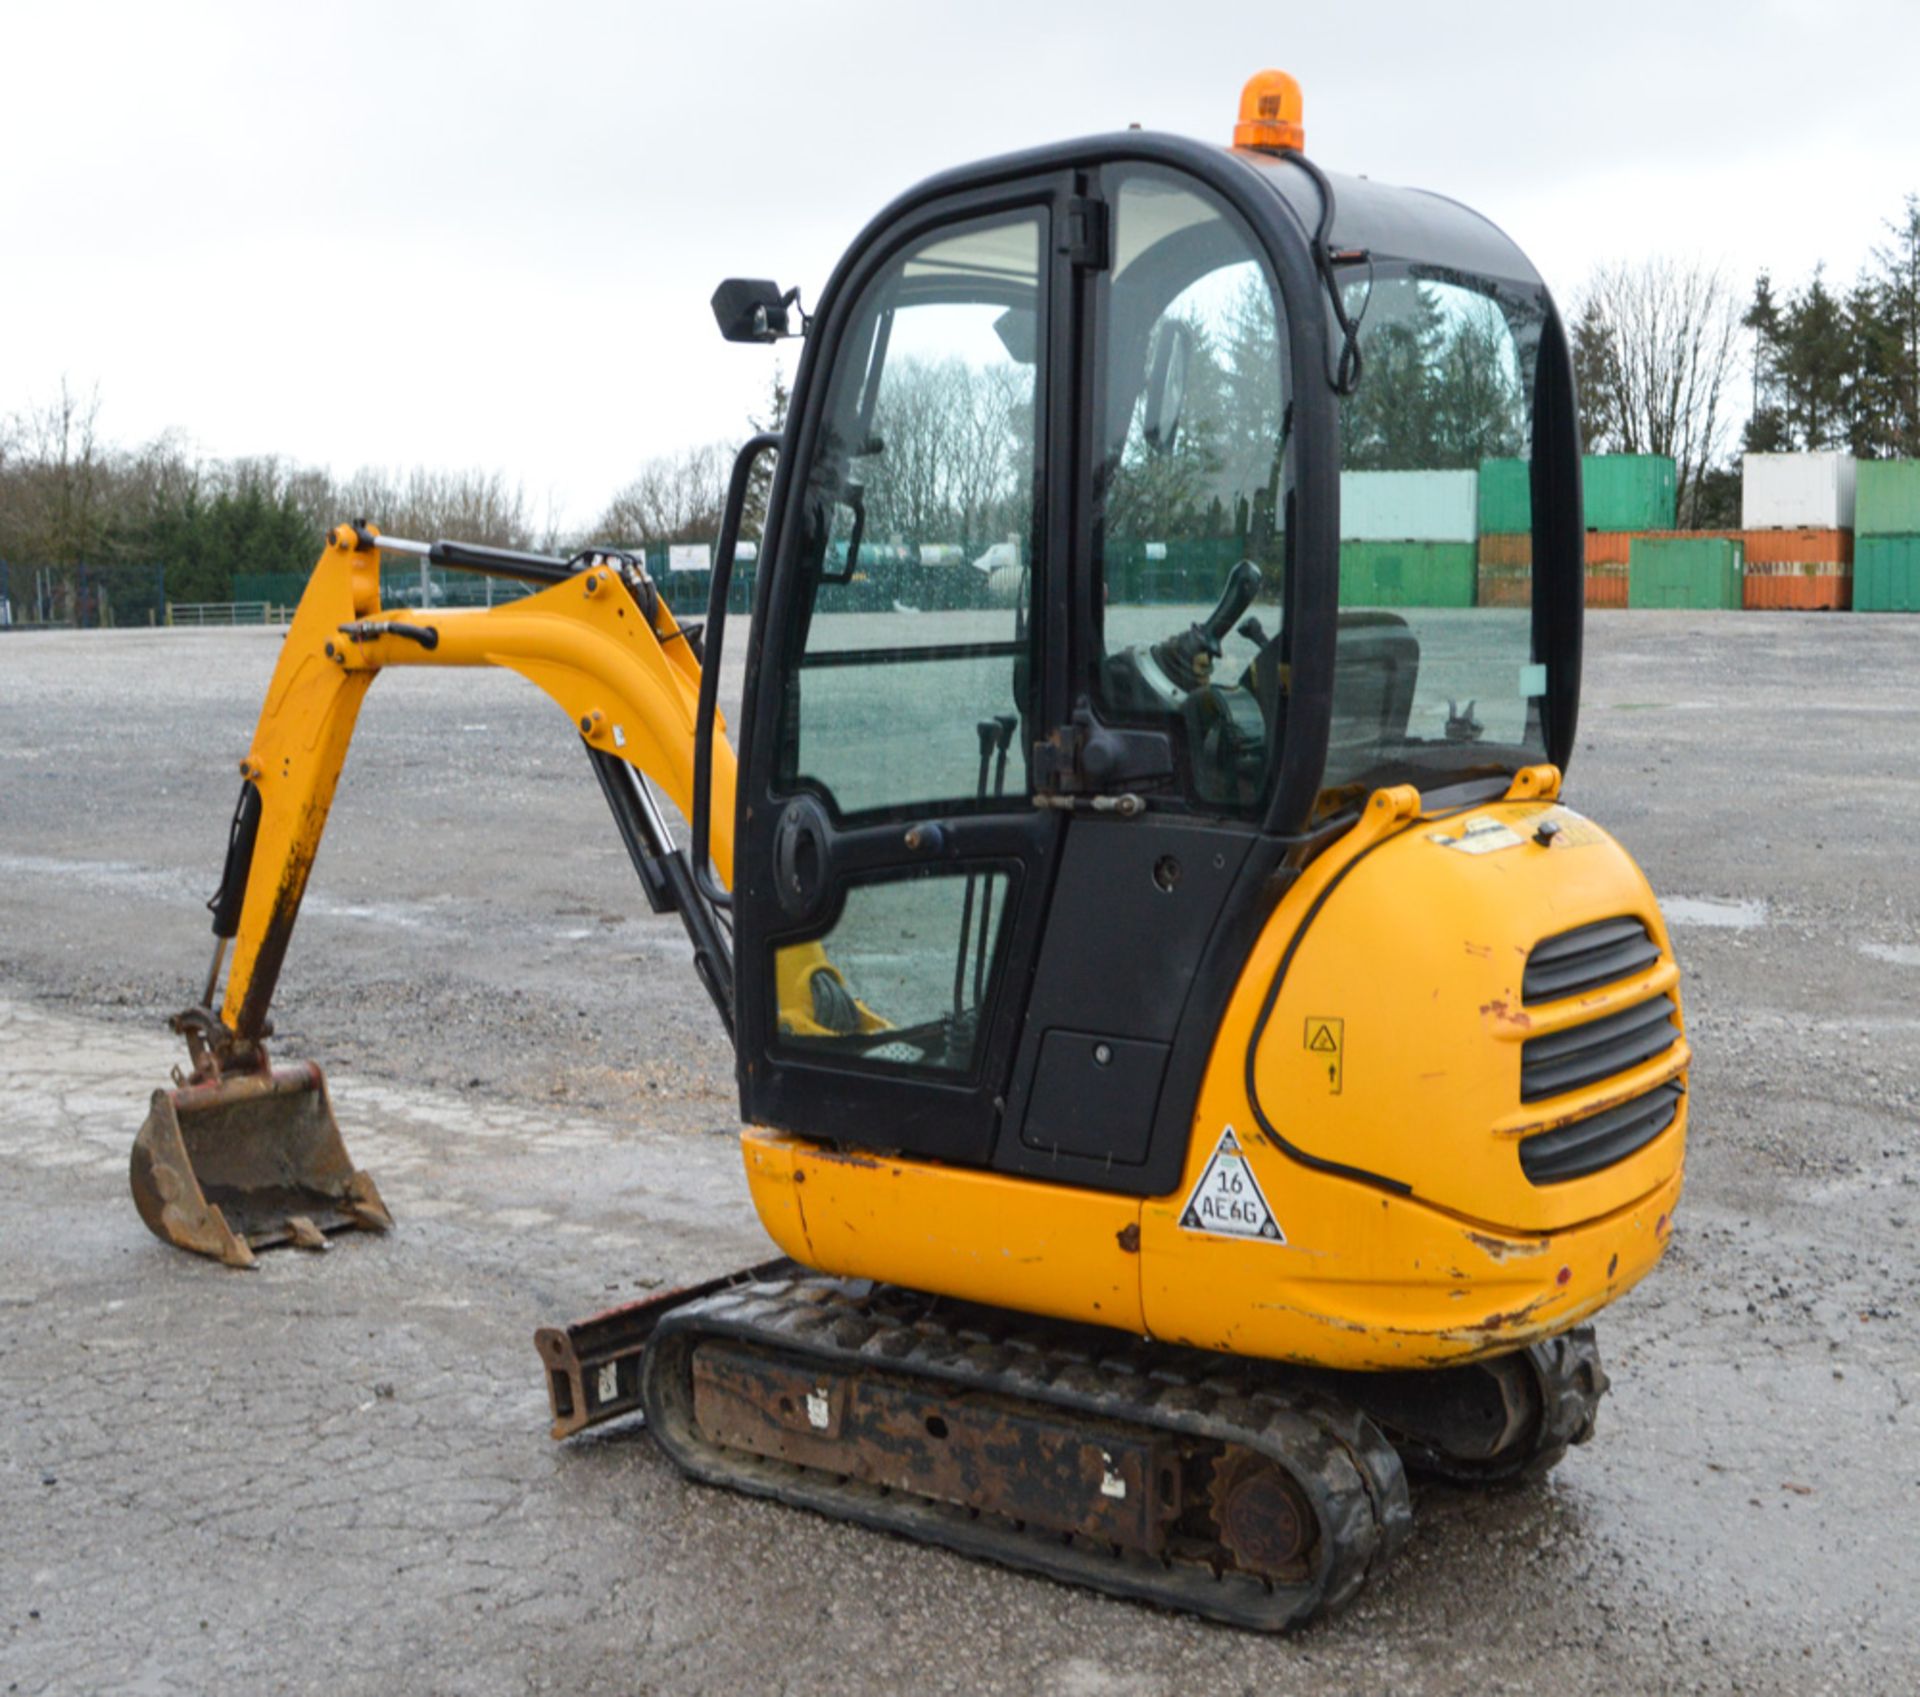 JCB 801.6 1.5 tonne rubber tracked mini excavator Year: 2011 S/N: 1703910 Recorded Hours: 1501 - Image 2 of 11